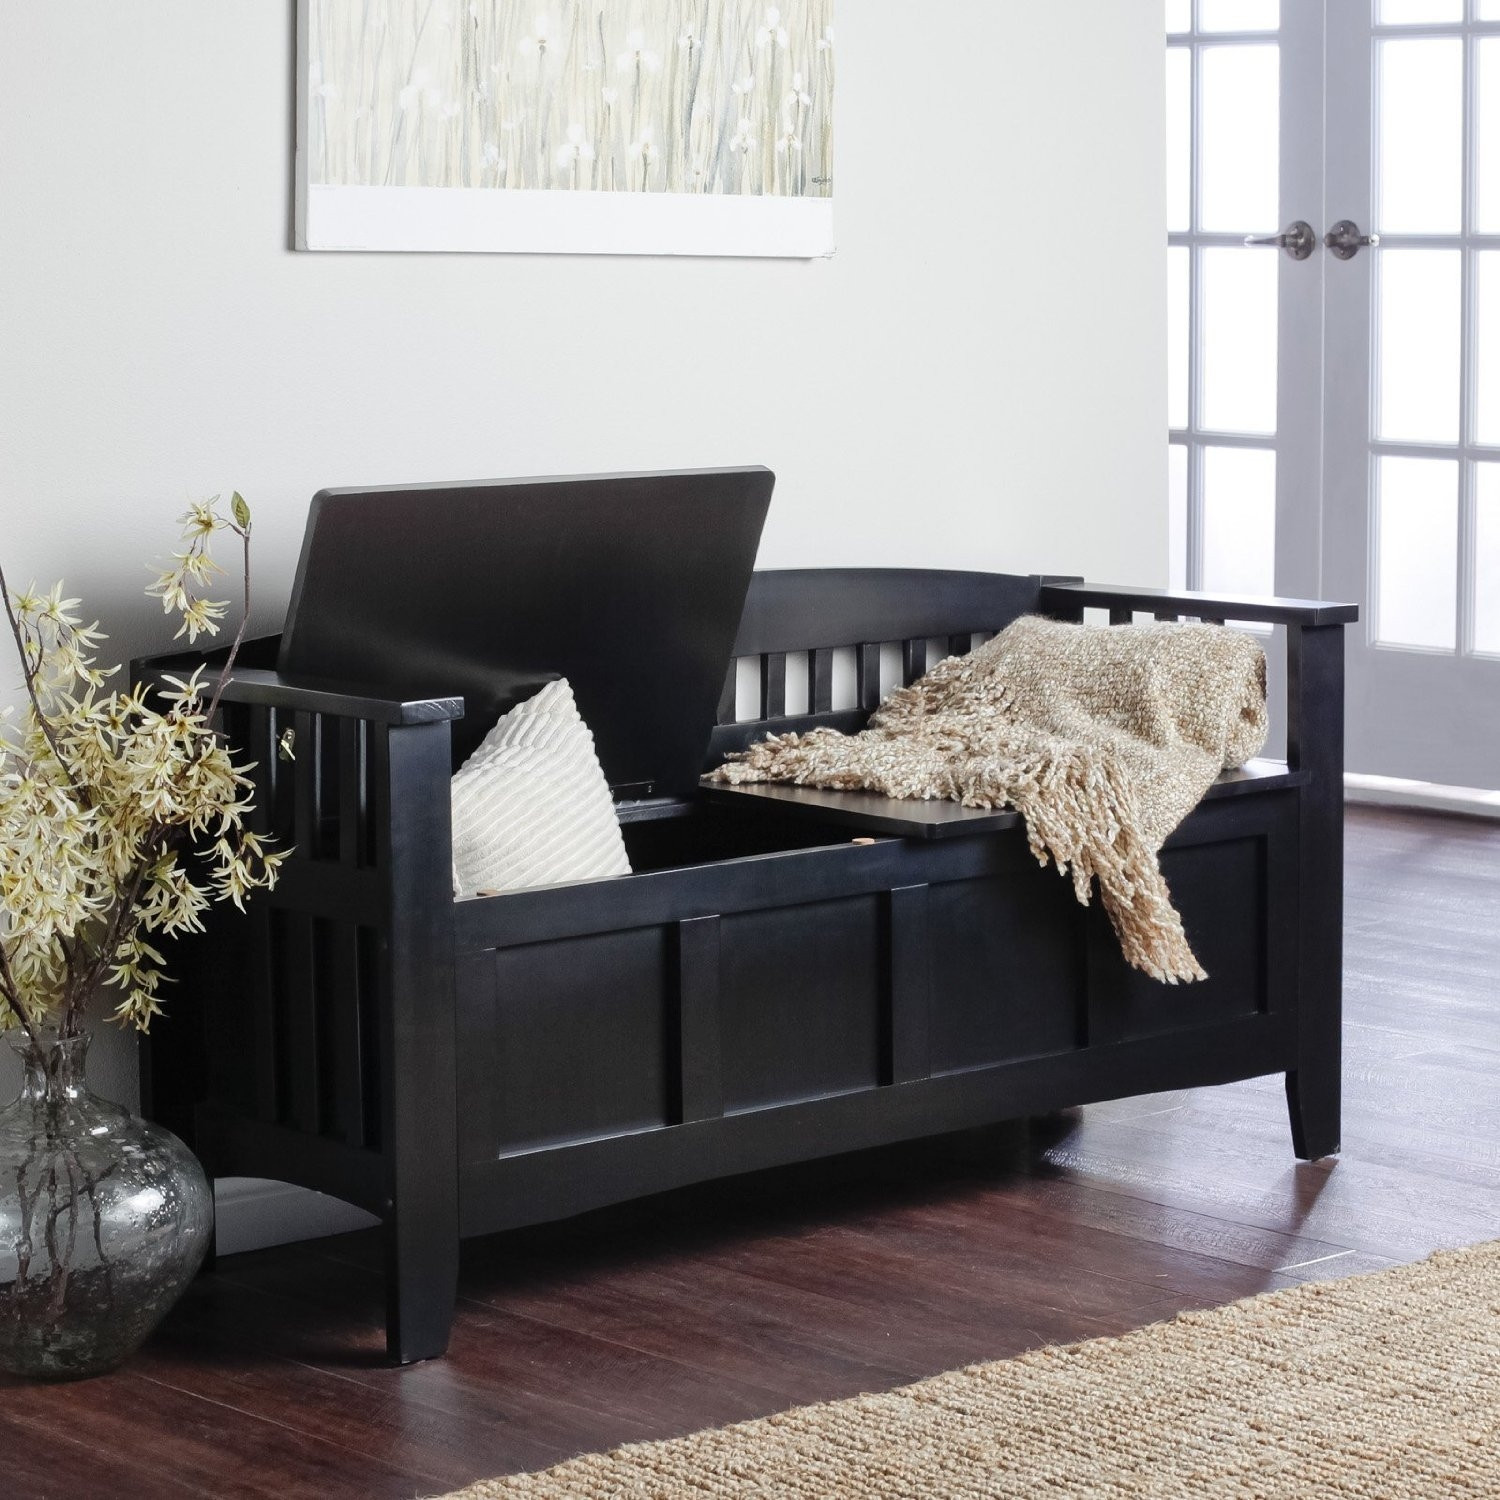 Front Entryway Storage Bench
 Entry Storage Bench With Cushion